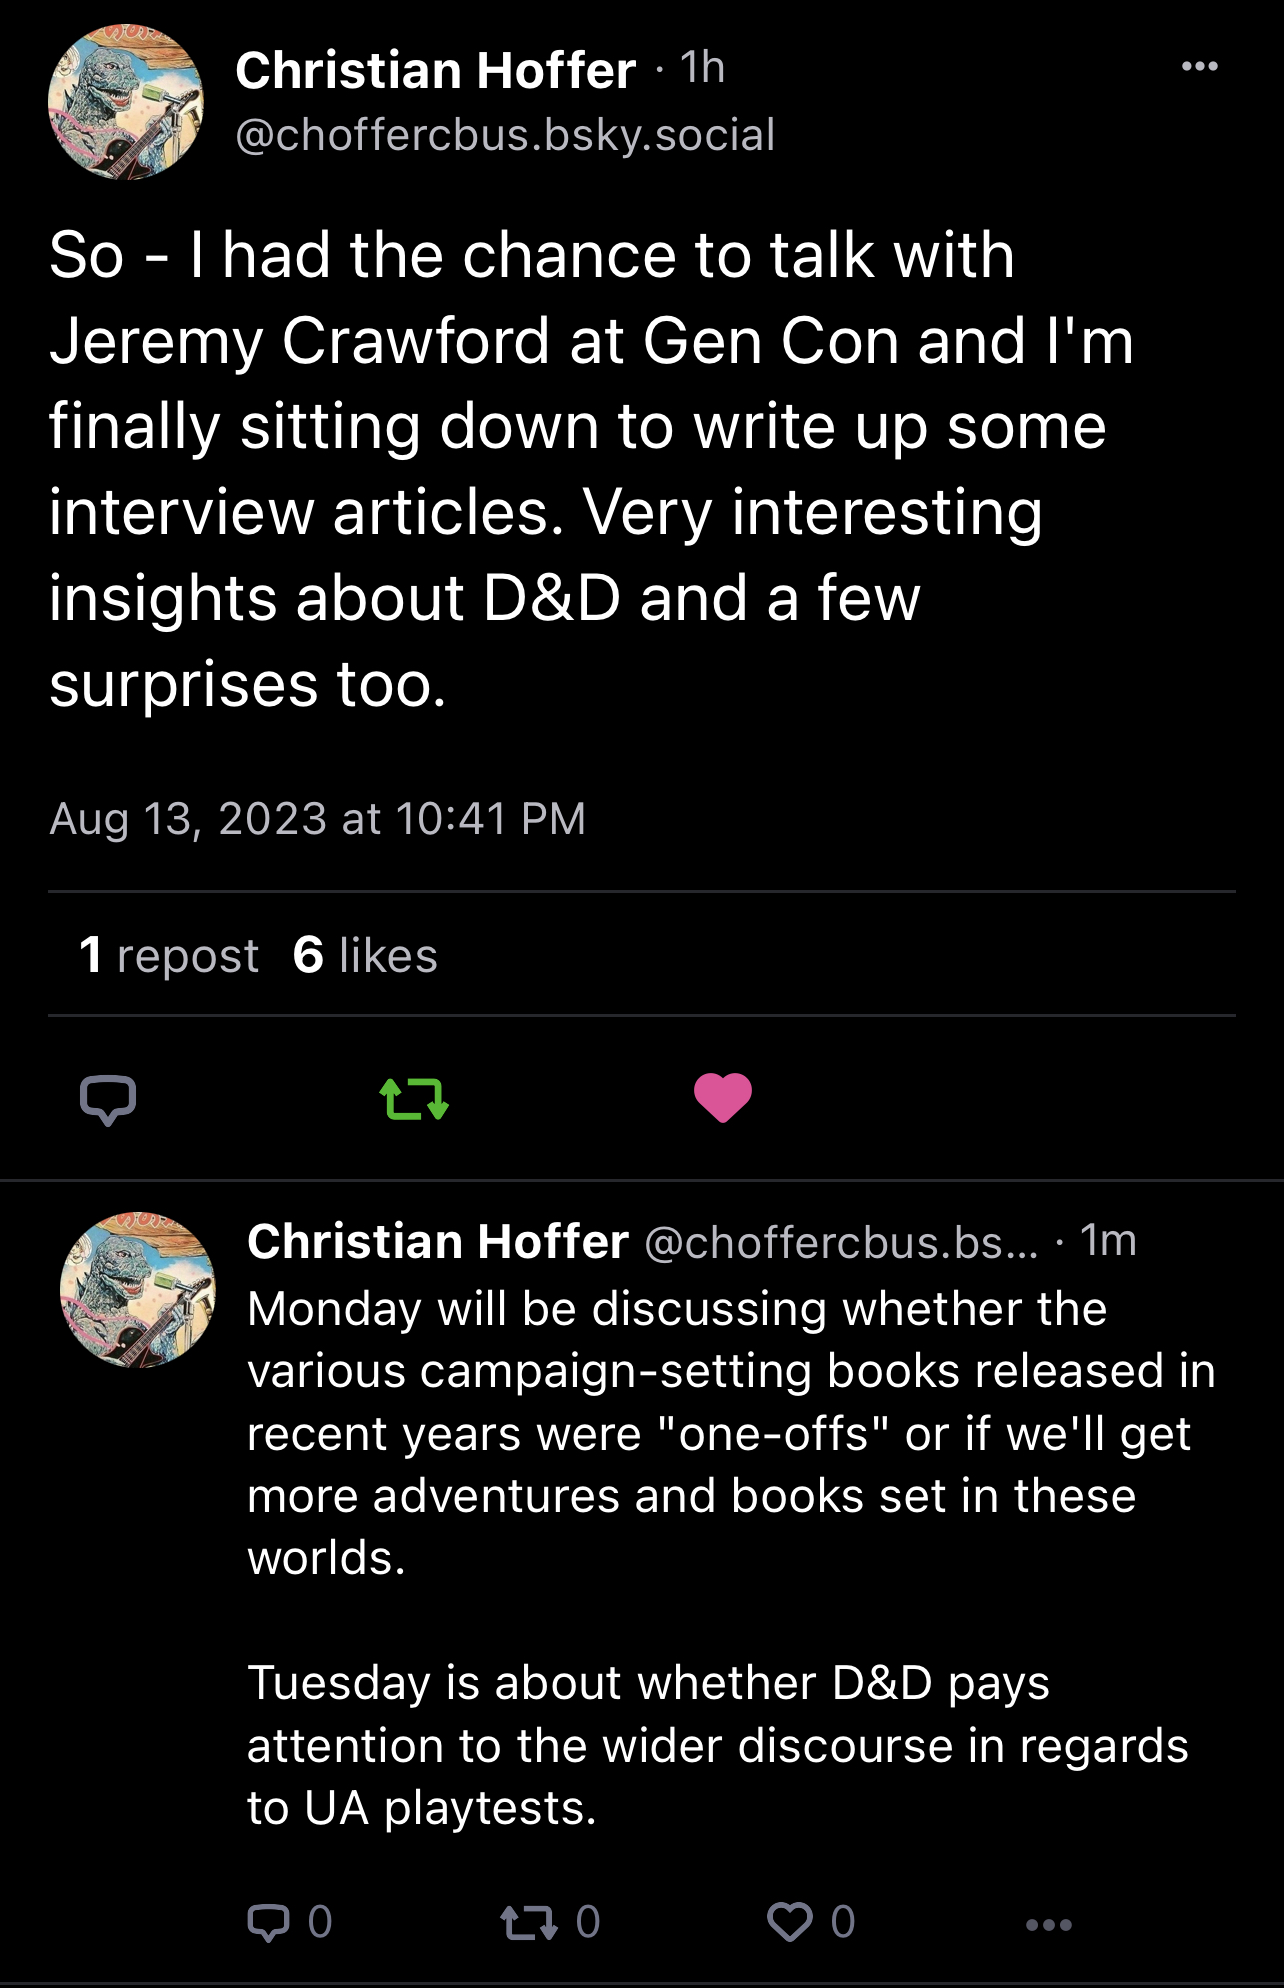 So - I had the chance to talk with Jeremy Crawford at Gen Con and I'm finally sitting down to write up some interview articles. Very interesting insights about D&D and a few surprises too. Monday will be discussing whether the various campaign-setting books released in recent years were one-offs or if we'll get more adventures and books set in these worlds. Tuesday is about whether D&D pays attention to the wider discourse in regards to UA playtests.